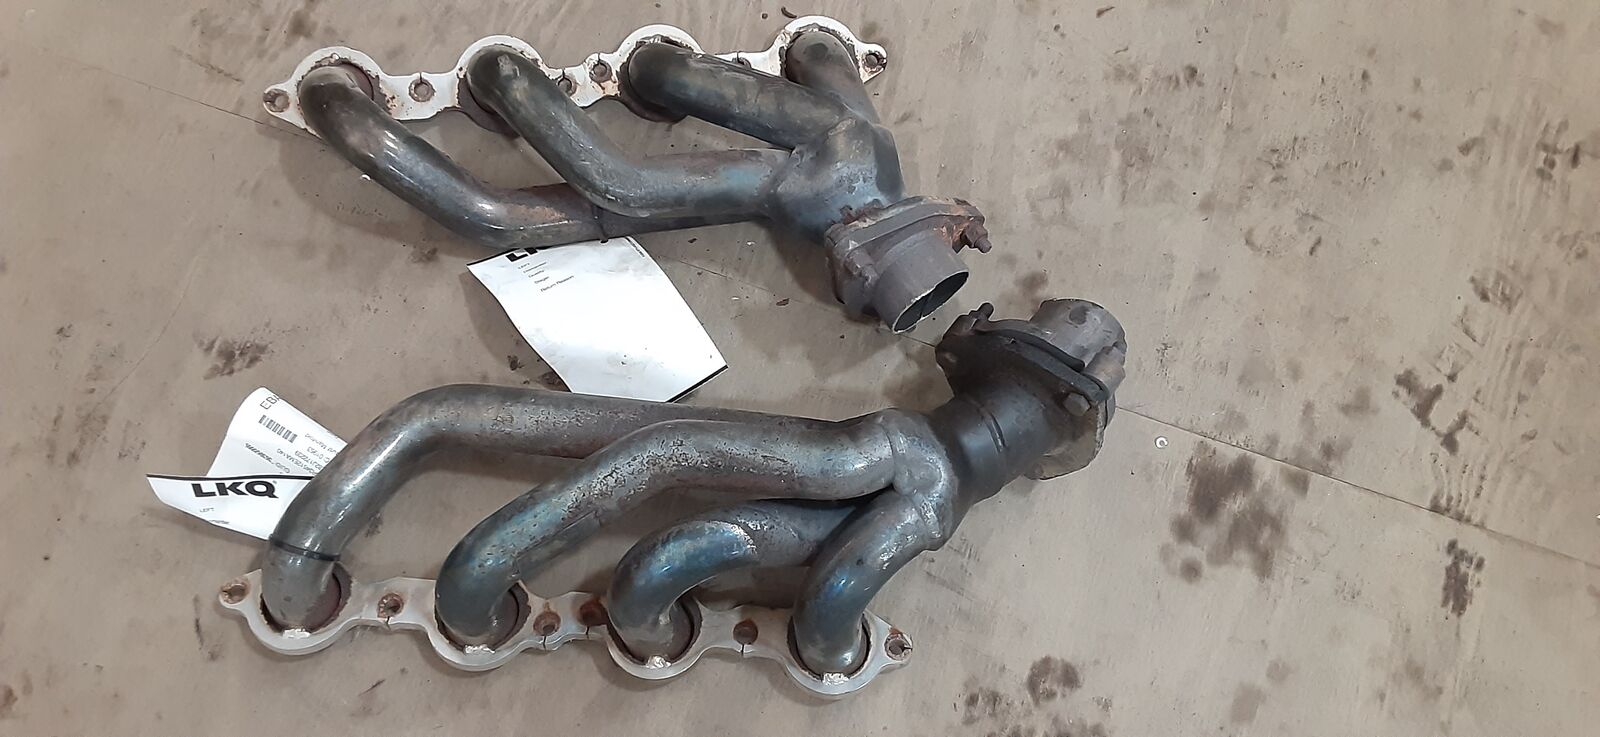 Aftermarket Shorty Headers From 2002 GMC 1500 Series LKQ